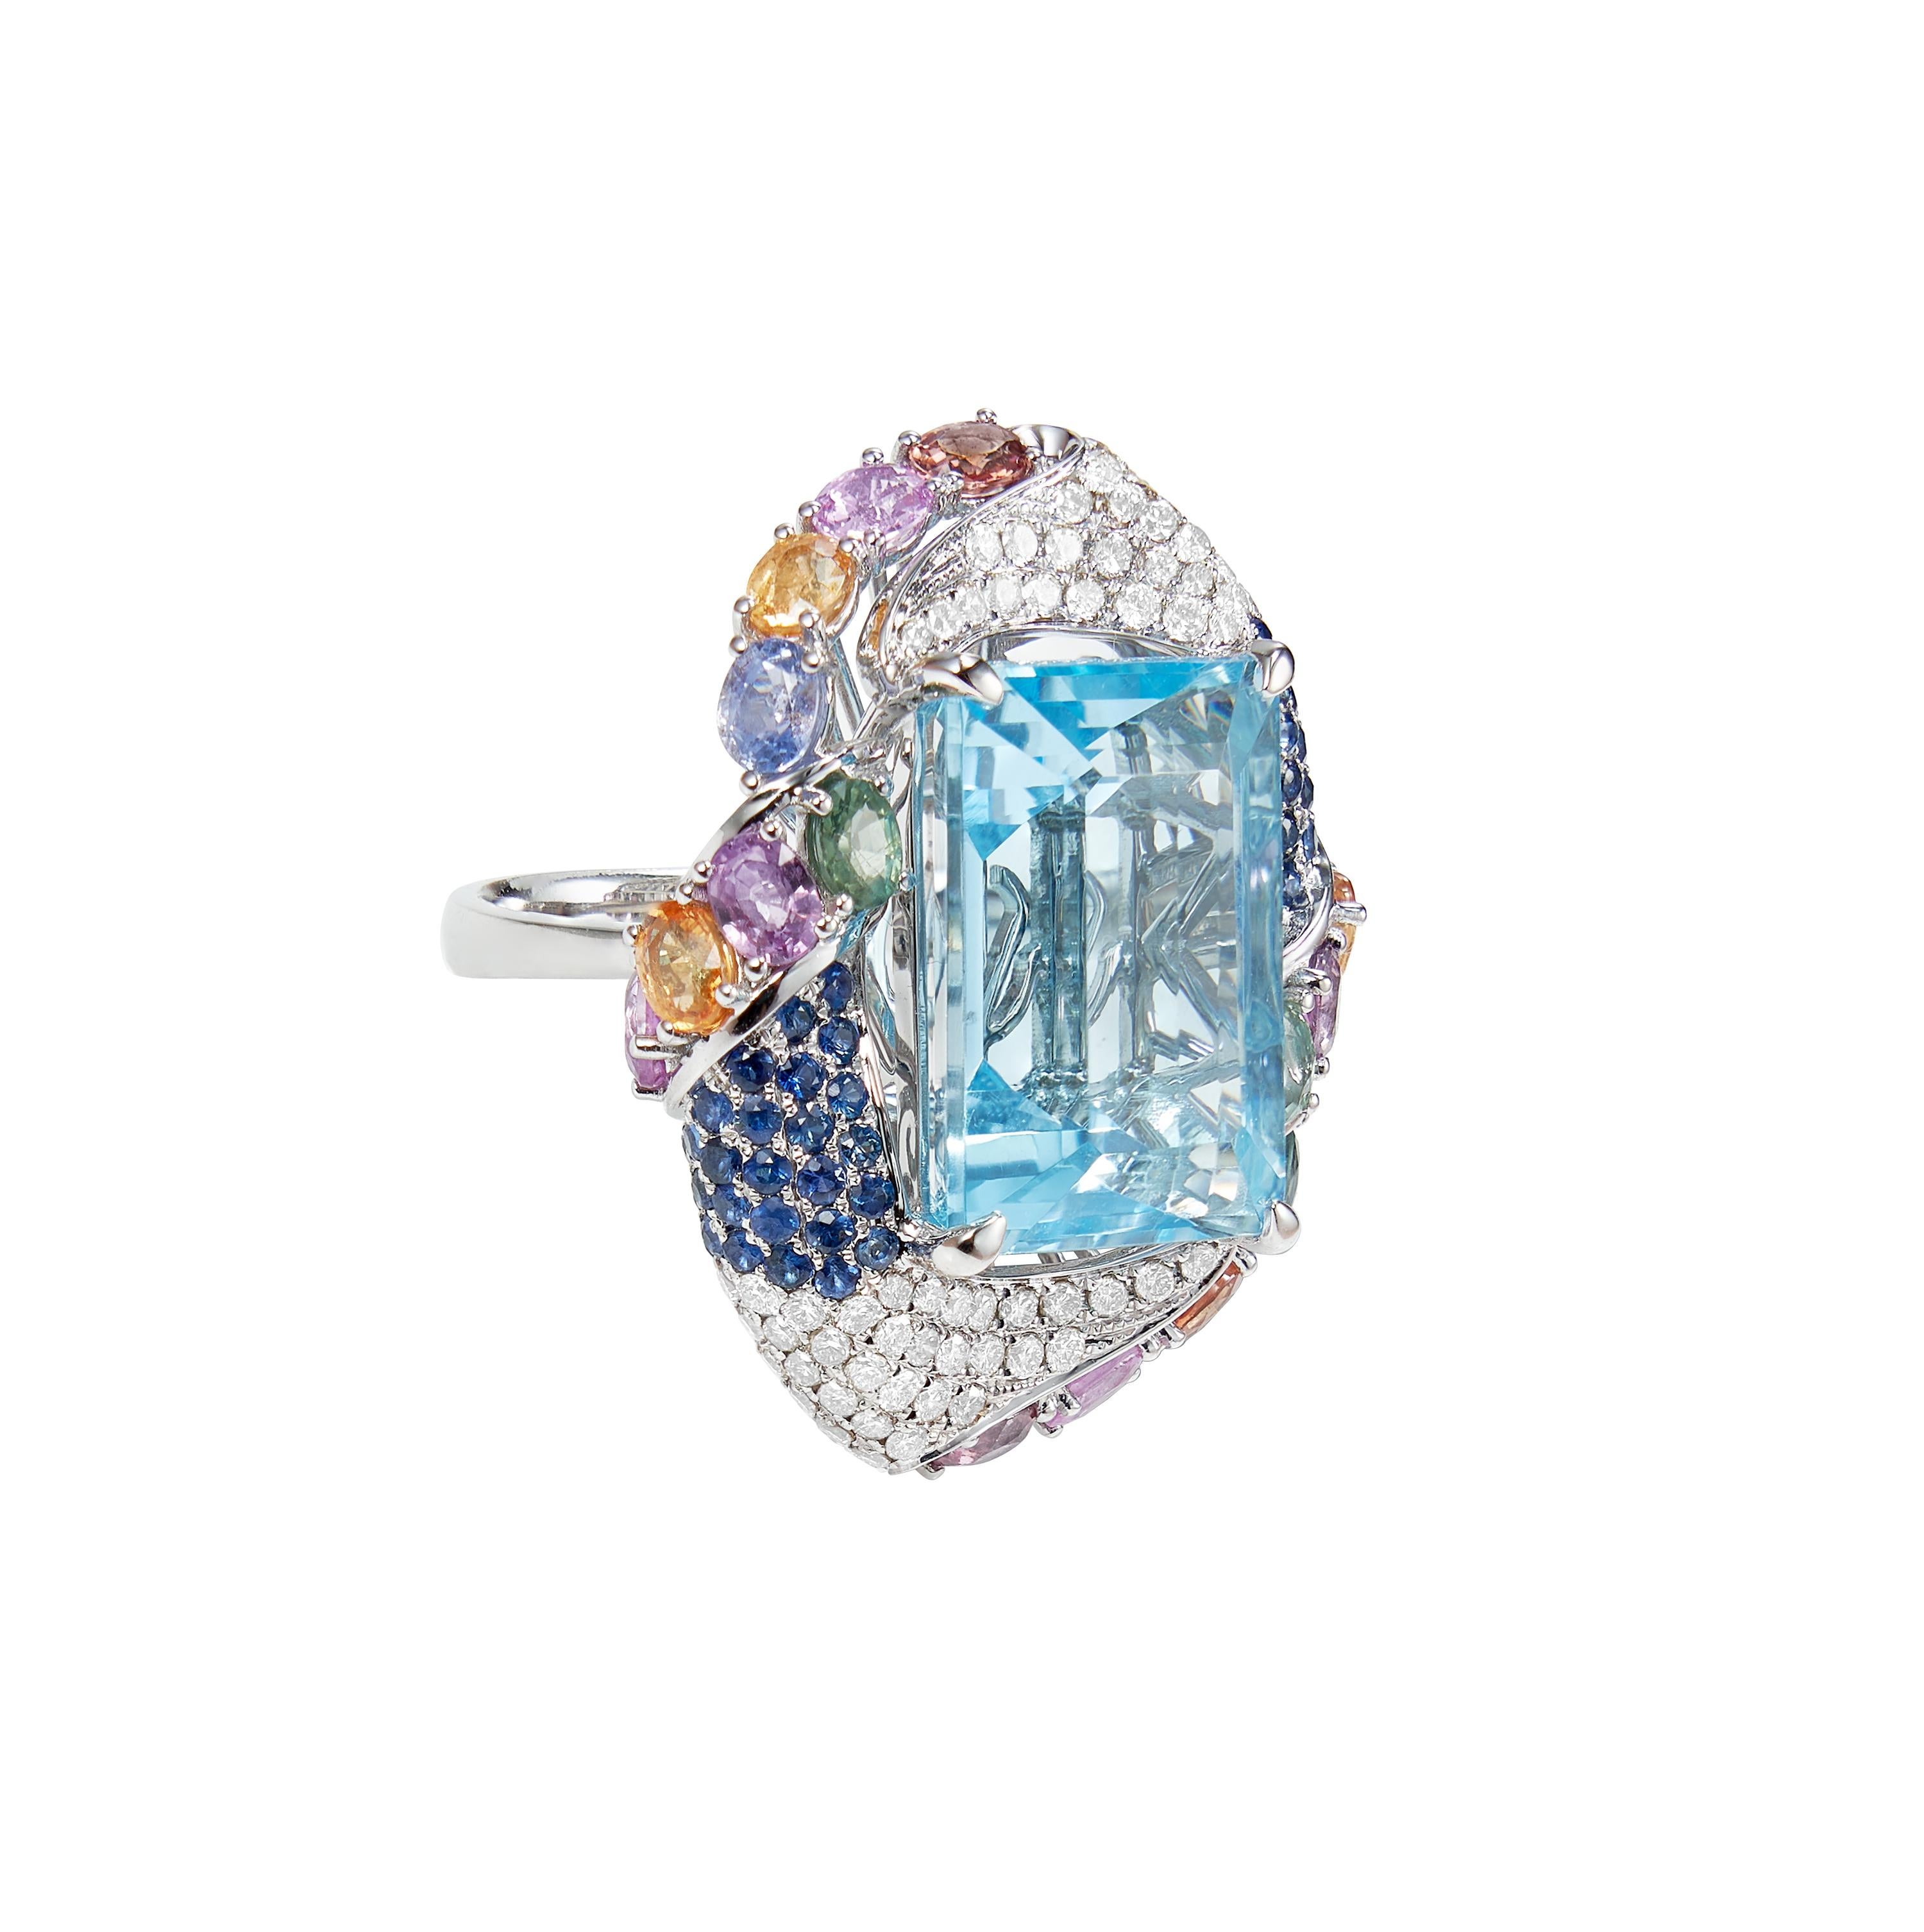 Octagon Cut 21.2 Carat Topaz with Sapphire & Diamond Cocktail Ring in 18 Karat White Gold For Sale